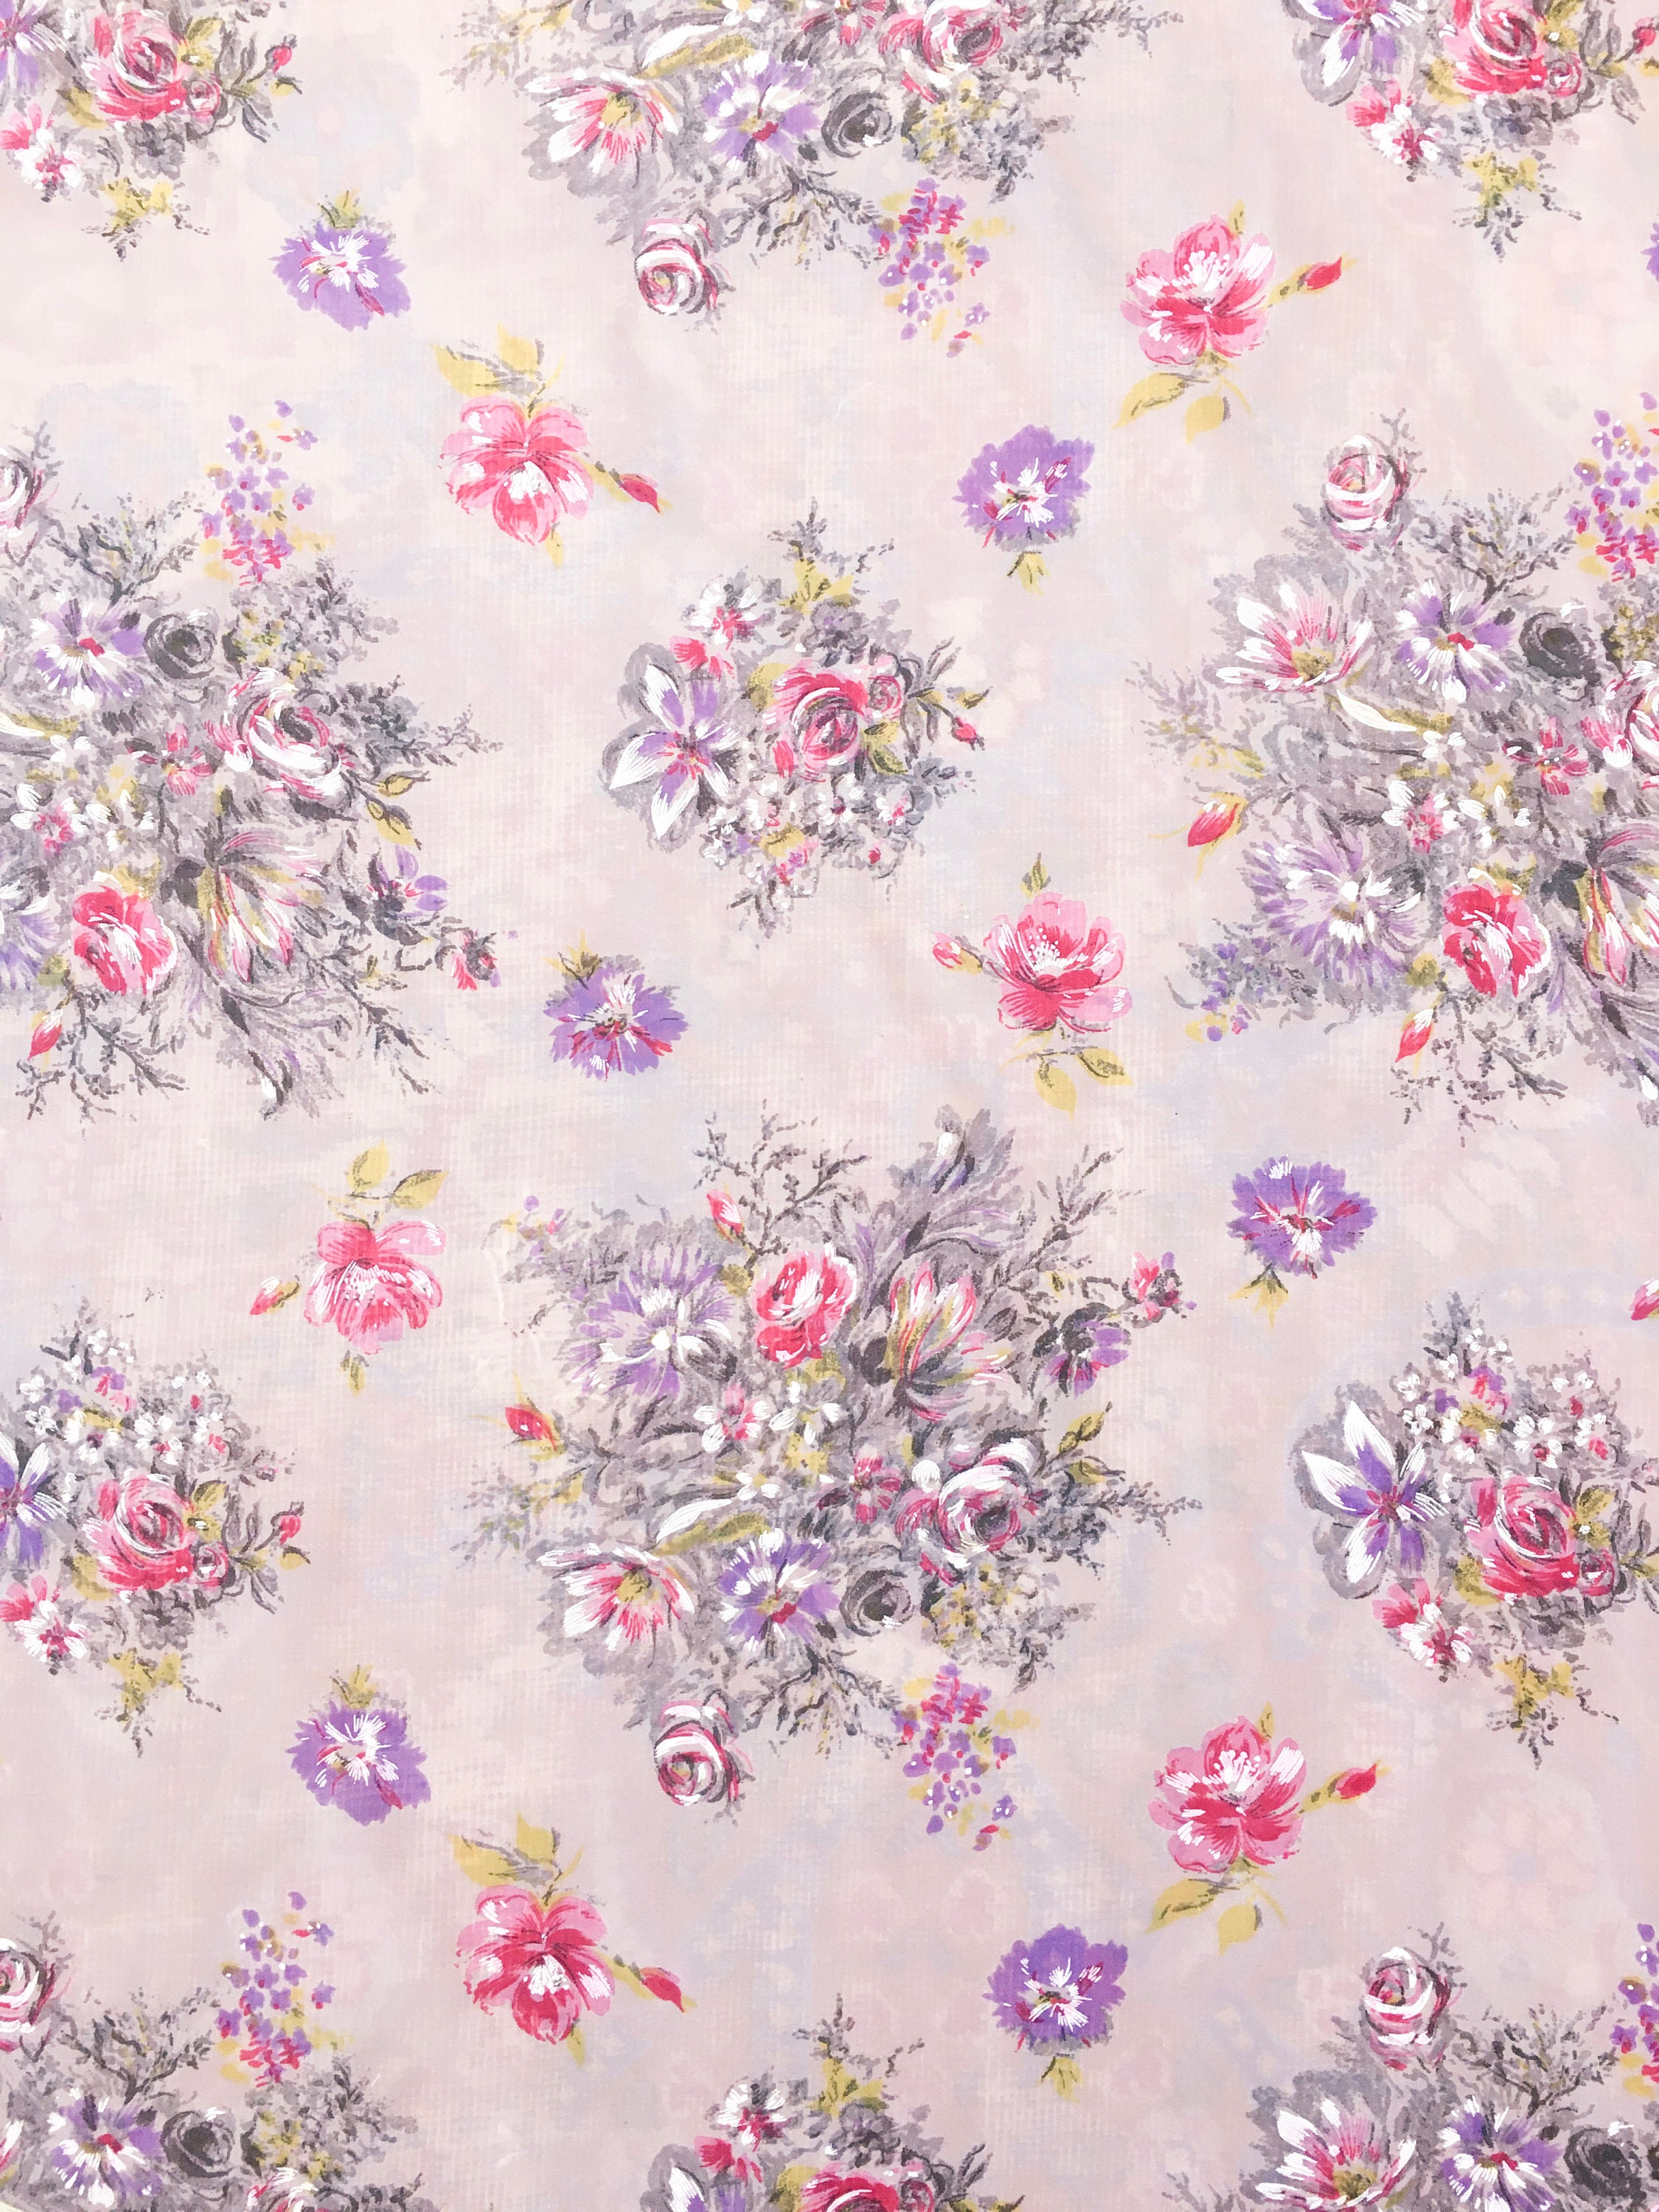 Vintage Floral Net Curtain Fabric - Etsy UK